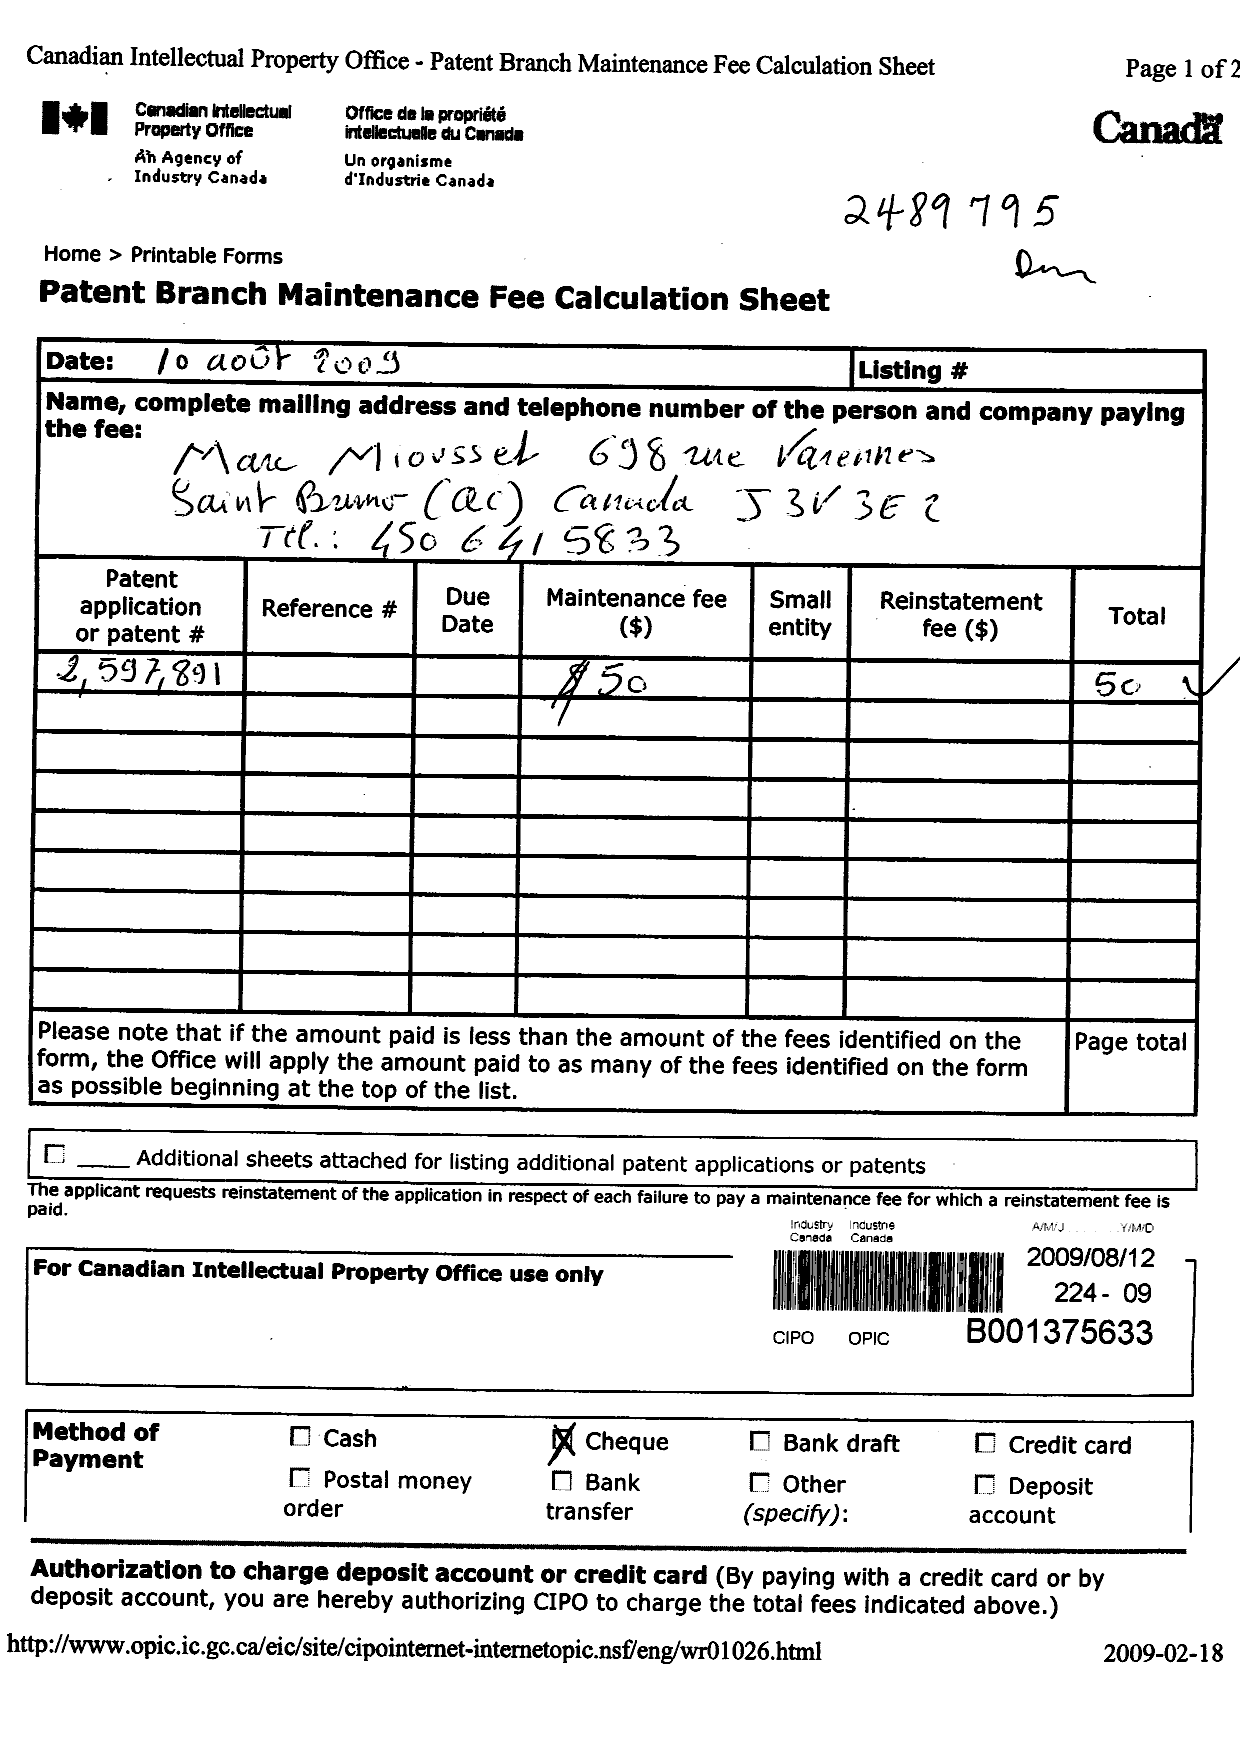 Canadian Patent Document 2597891. Fees 20090812. Image 1 of 3